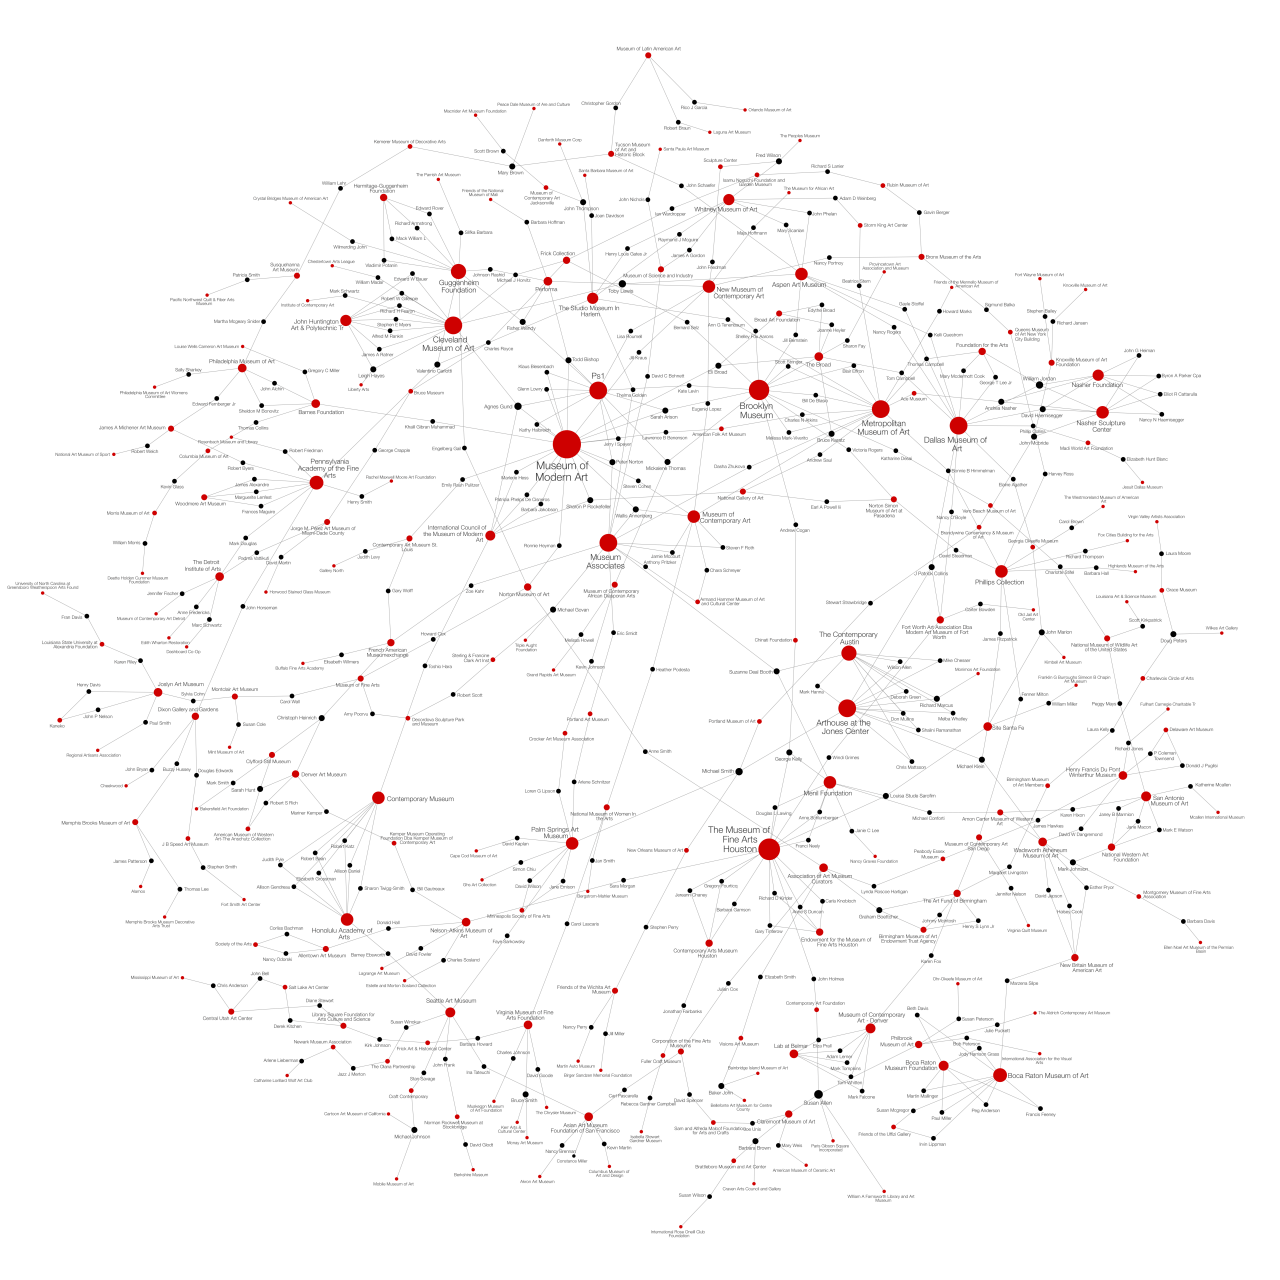 Network of art galleries and their board members represented by red and black dots of different sizes connected by lines